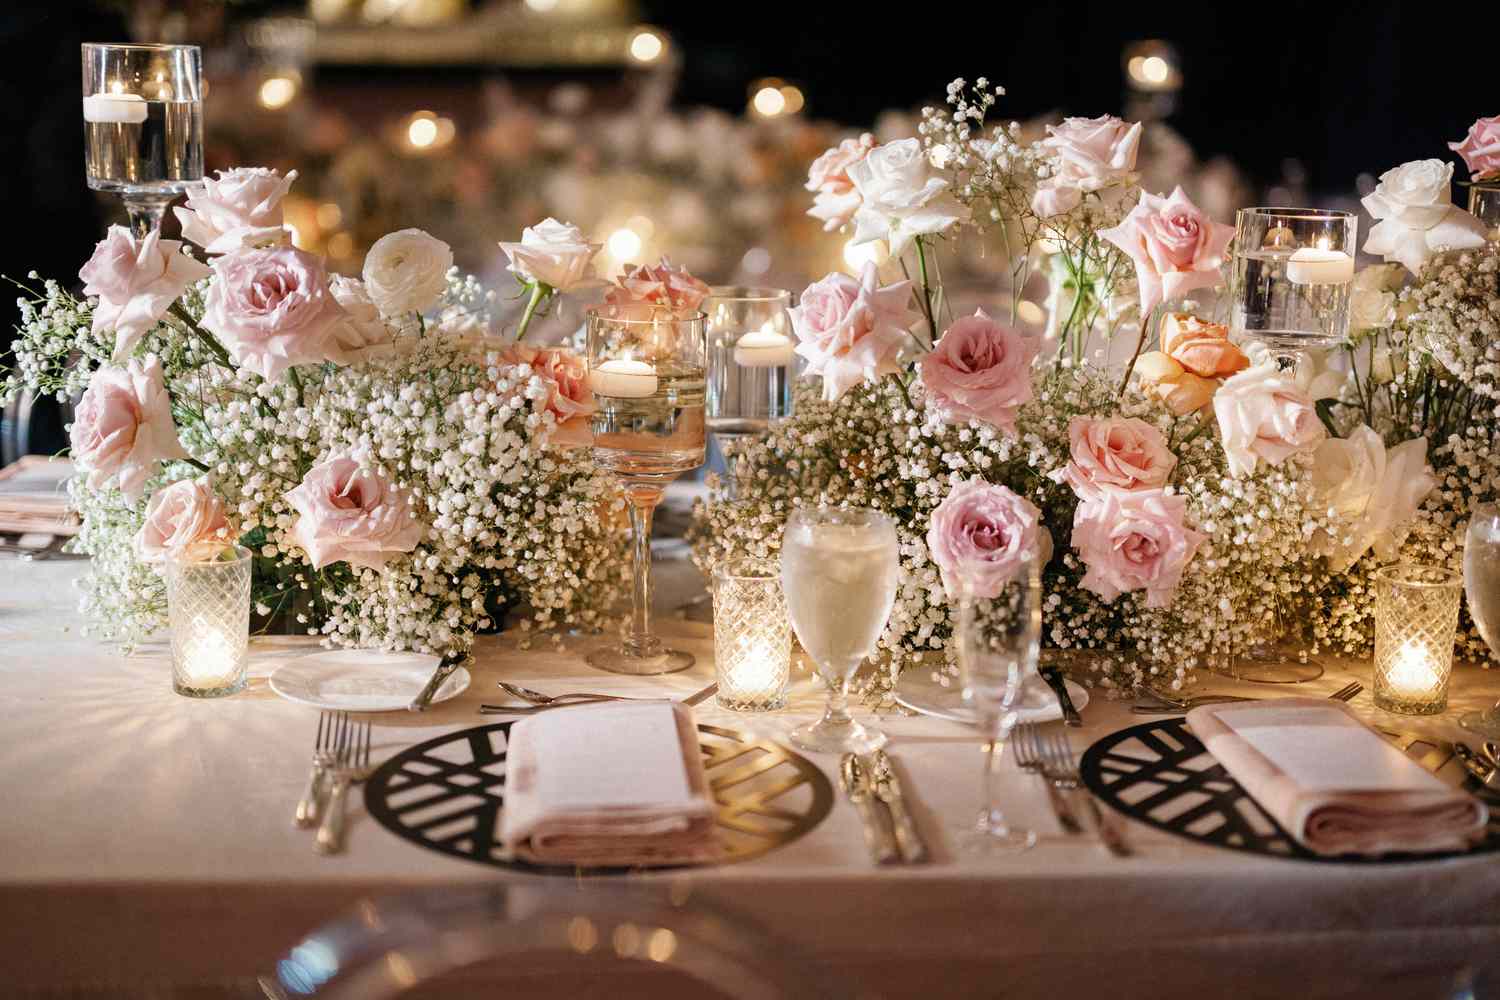 wedding table decoration with flowers and candles in jars